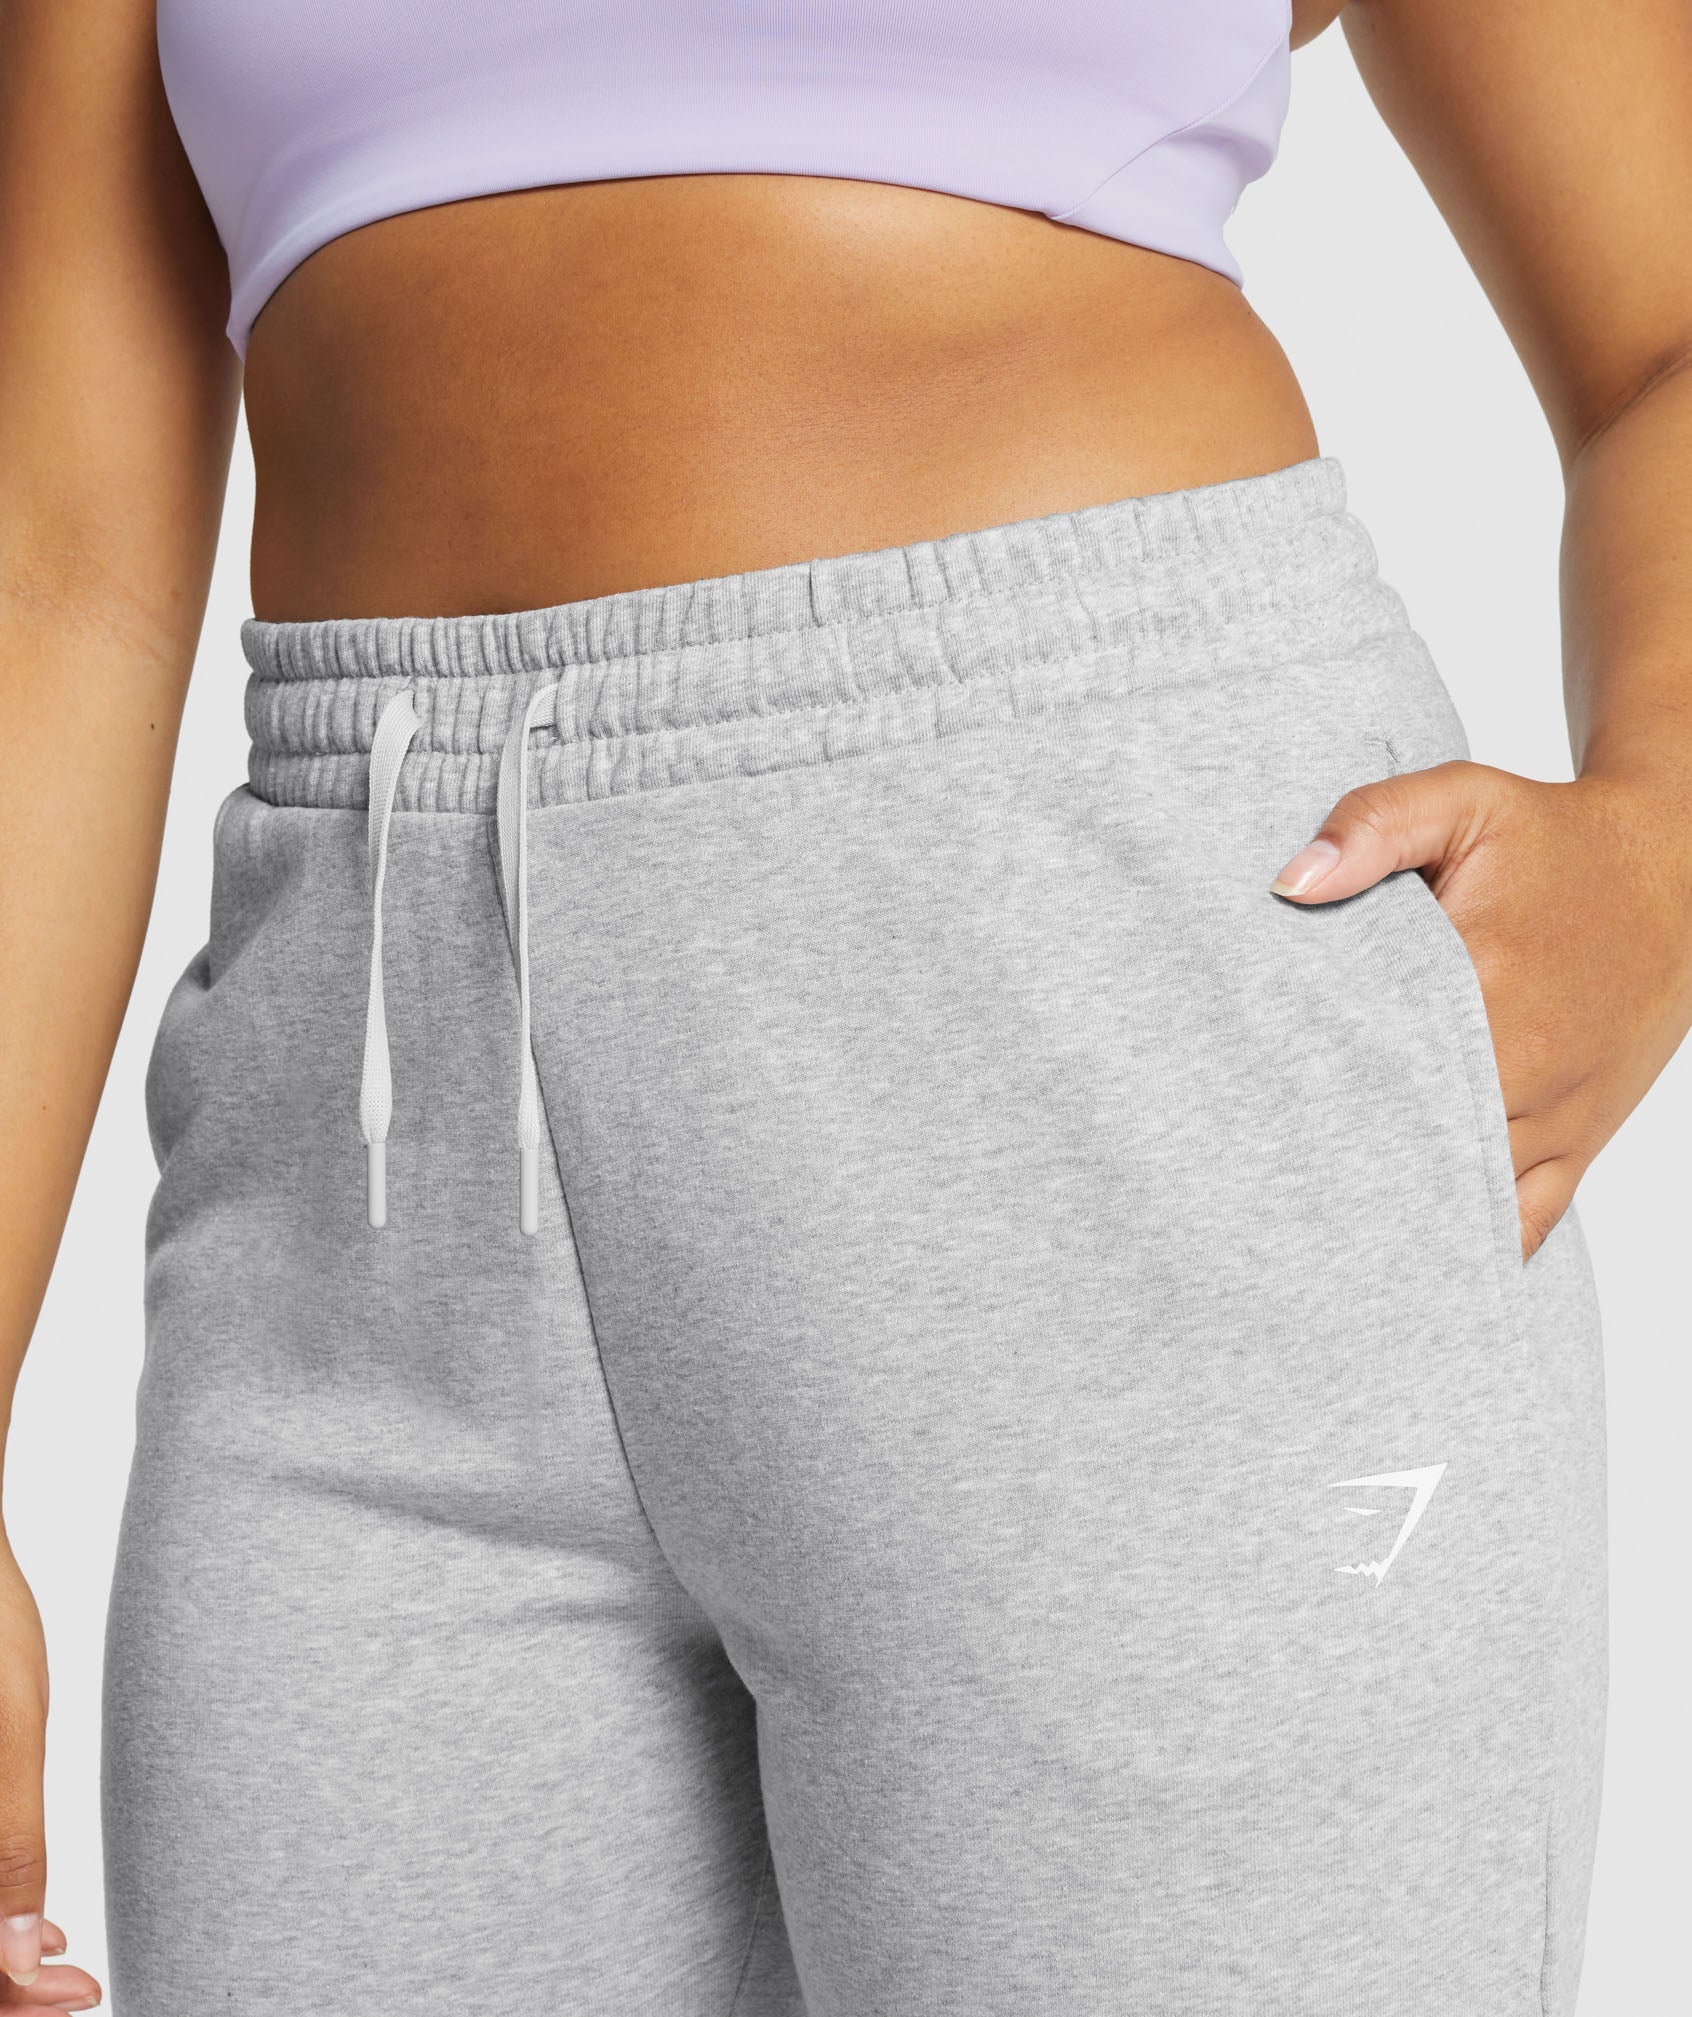 Gymshark Women's Drawcord Pippa Training Joggers White Size S Read